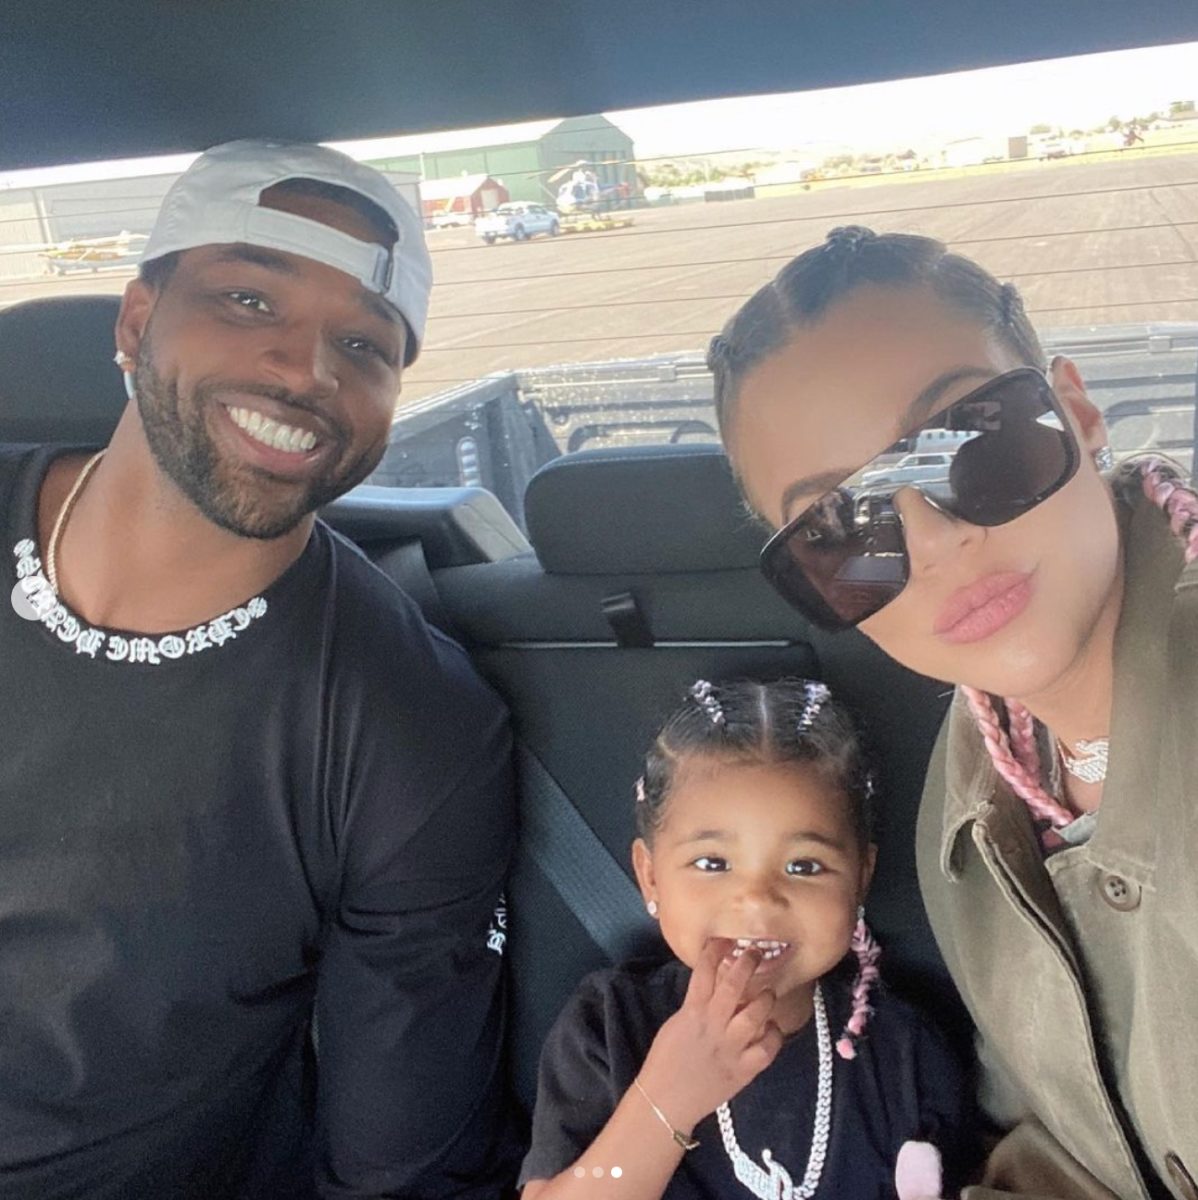 NBA Star Suspended From the League For Violating the Anti-Drug Policy | Kendall and Kylie Jenner are not holding back when talking about the way Tristan Thompson treated their older sister Khloe Kardashian.